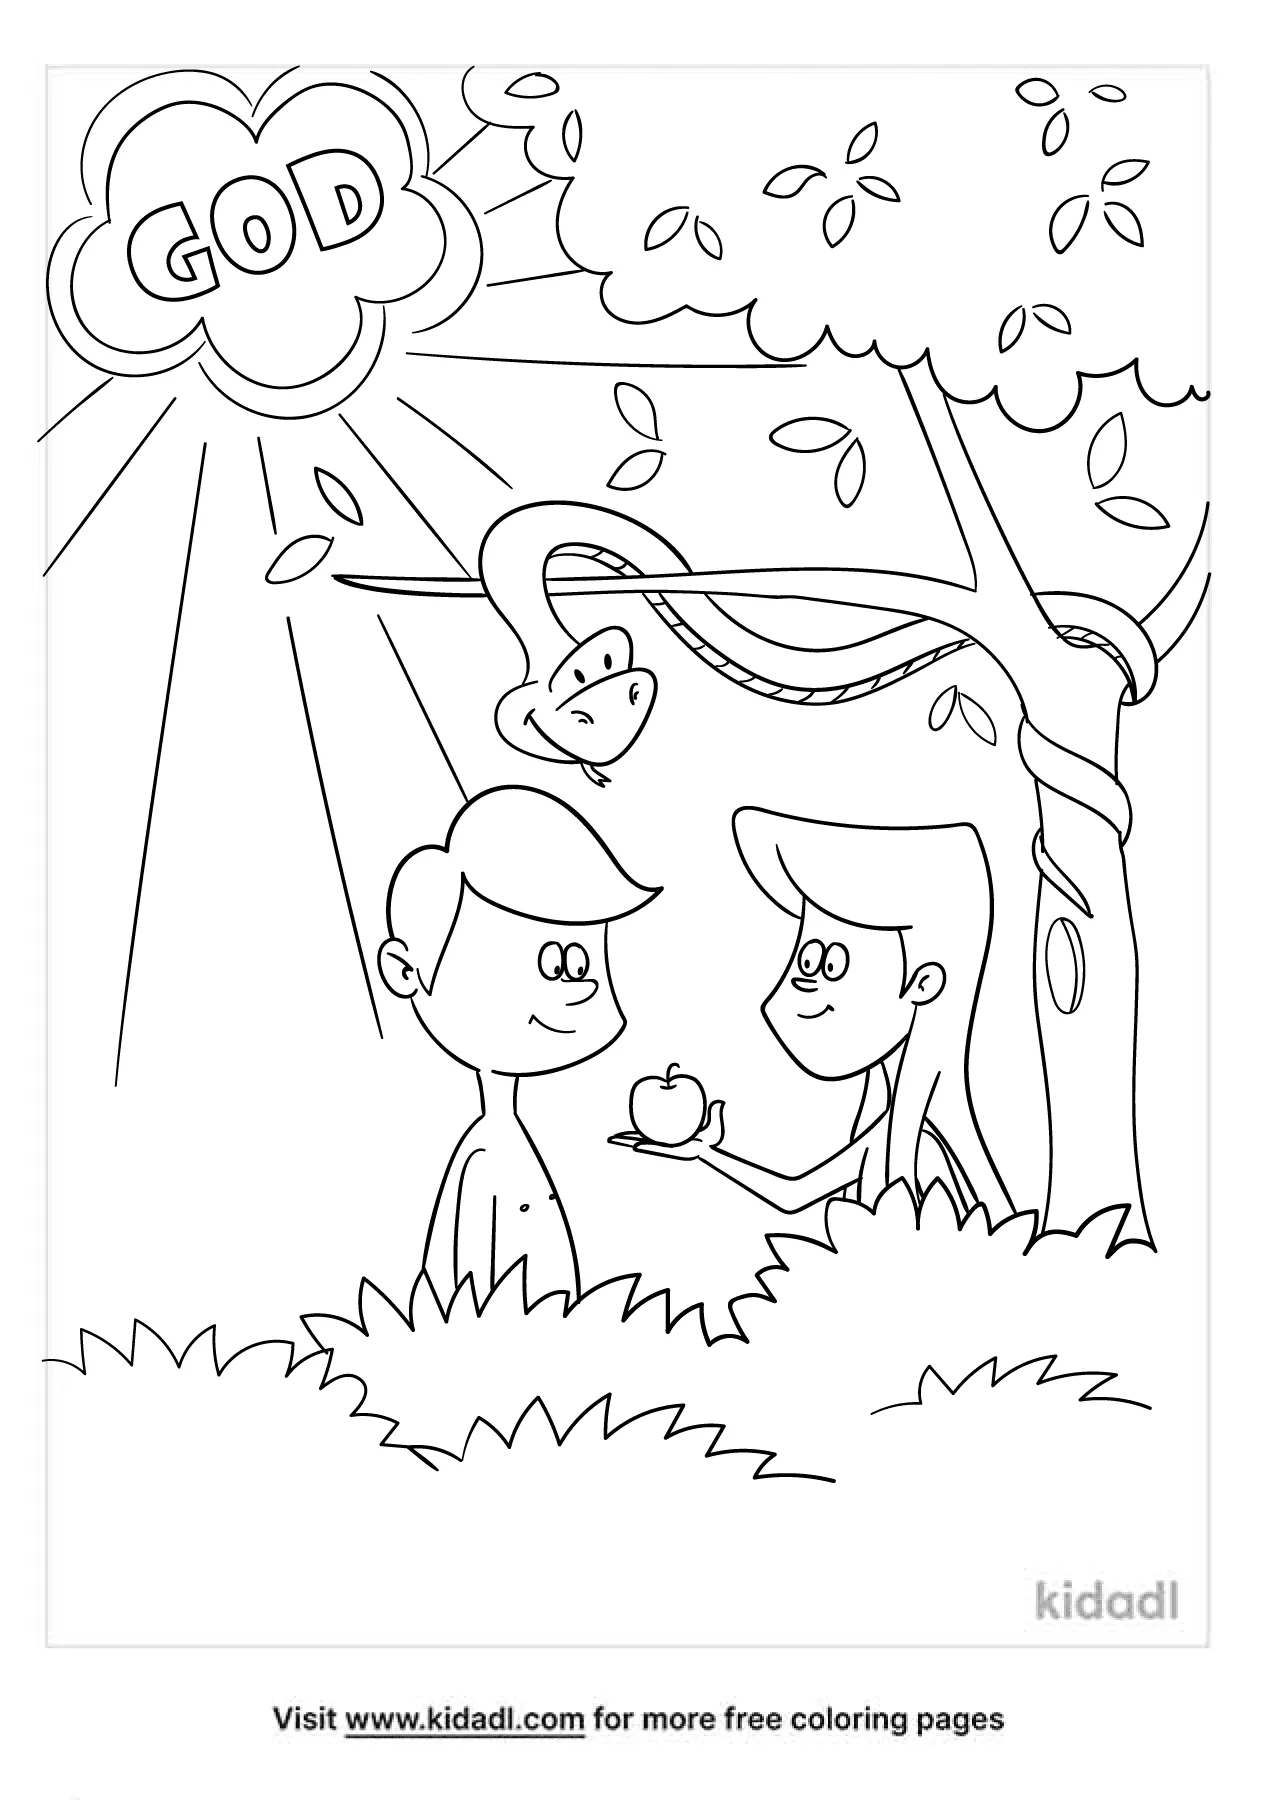 Adam And Eve With God Coloring Page   Free Bible Coloring Page ...